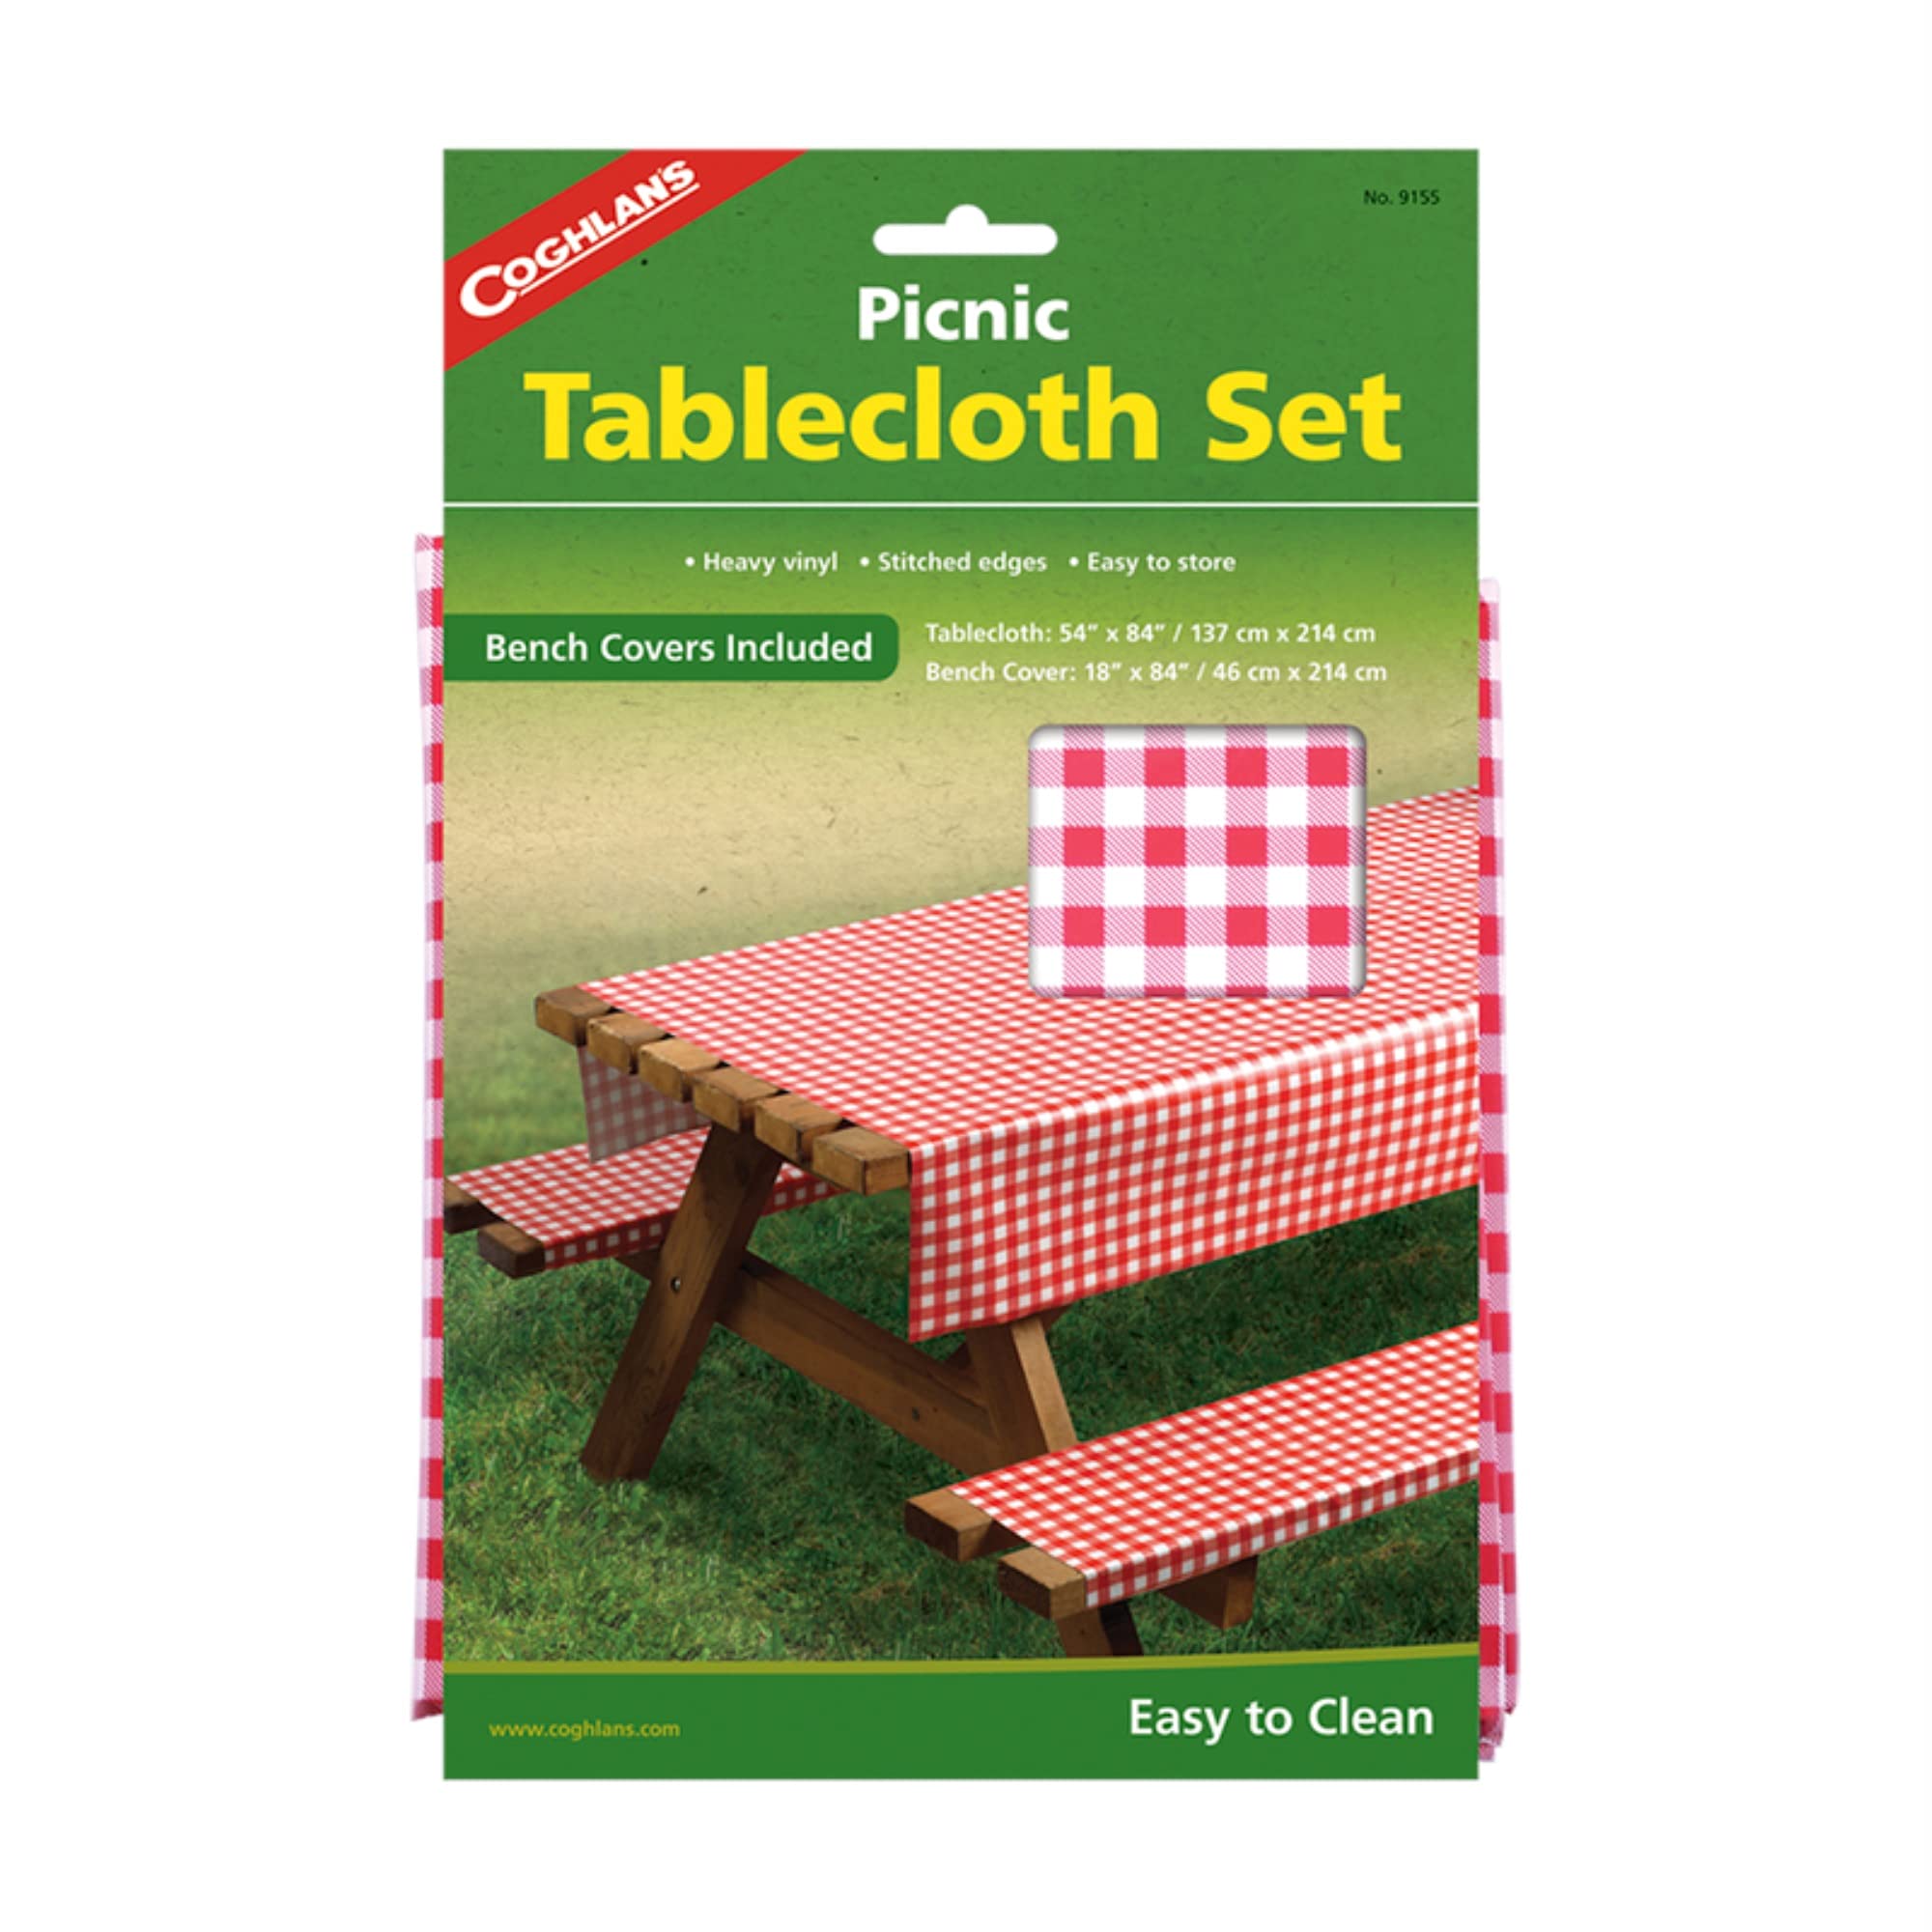 Coghlan's Ltd. coghlans Picnic Table Set with Tablecloth and Bench covers, Multi, One Size